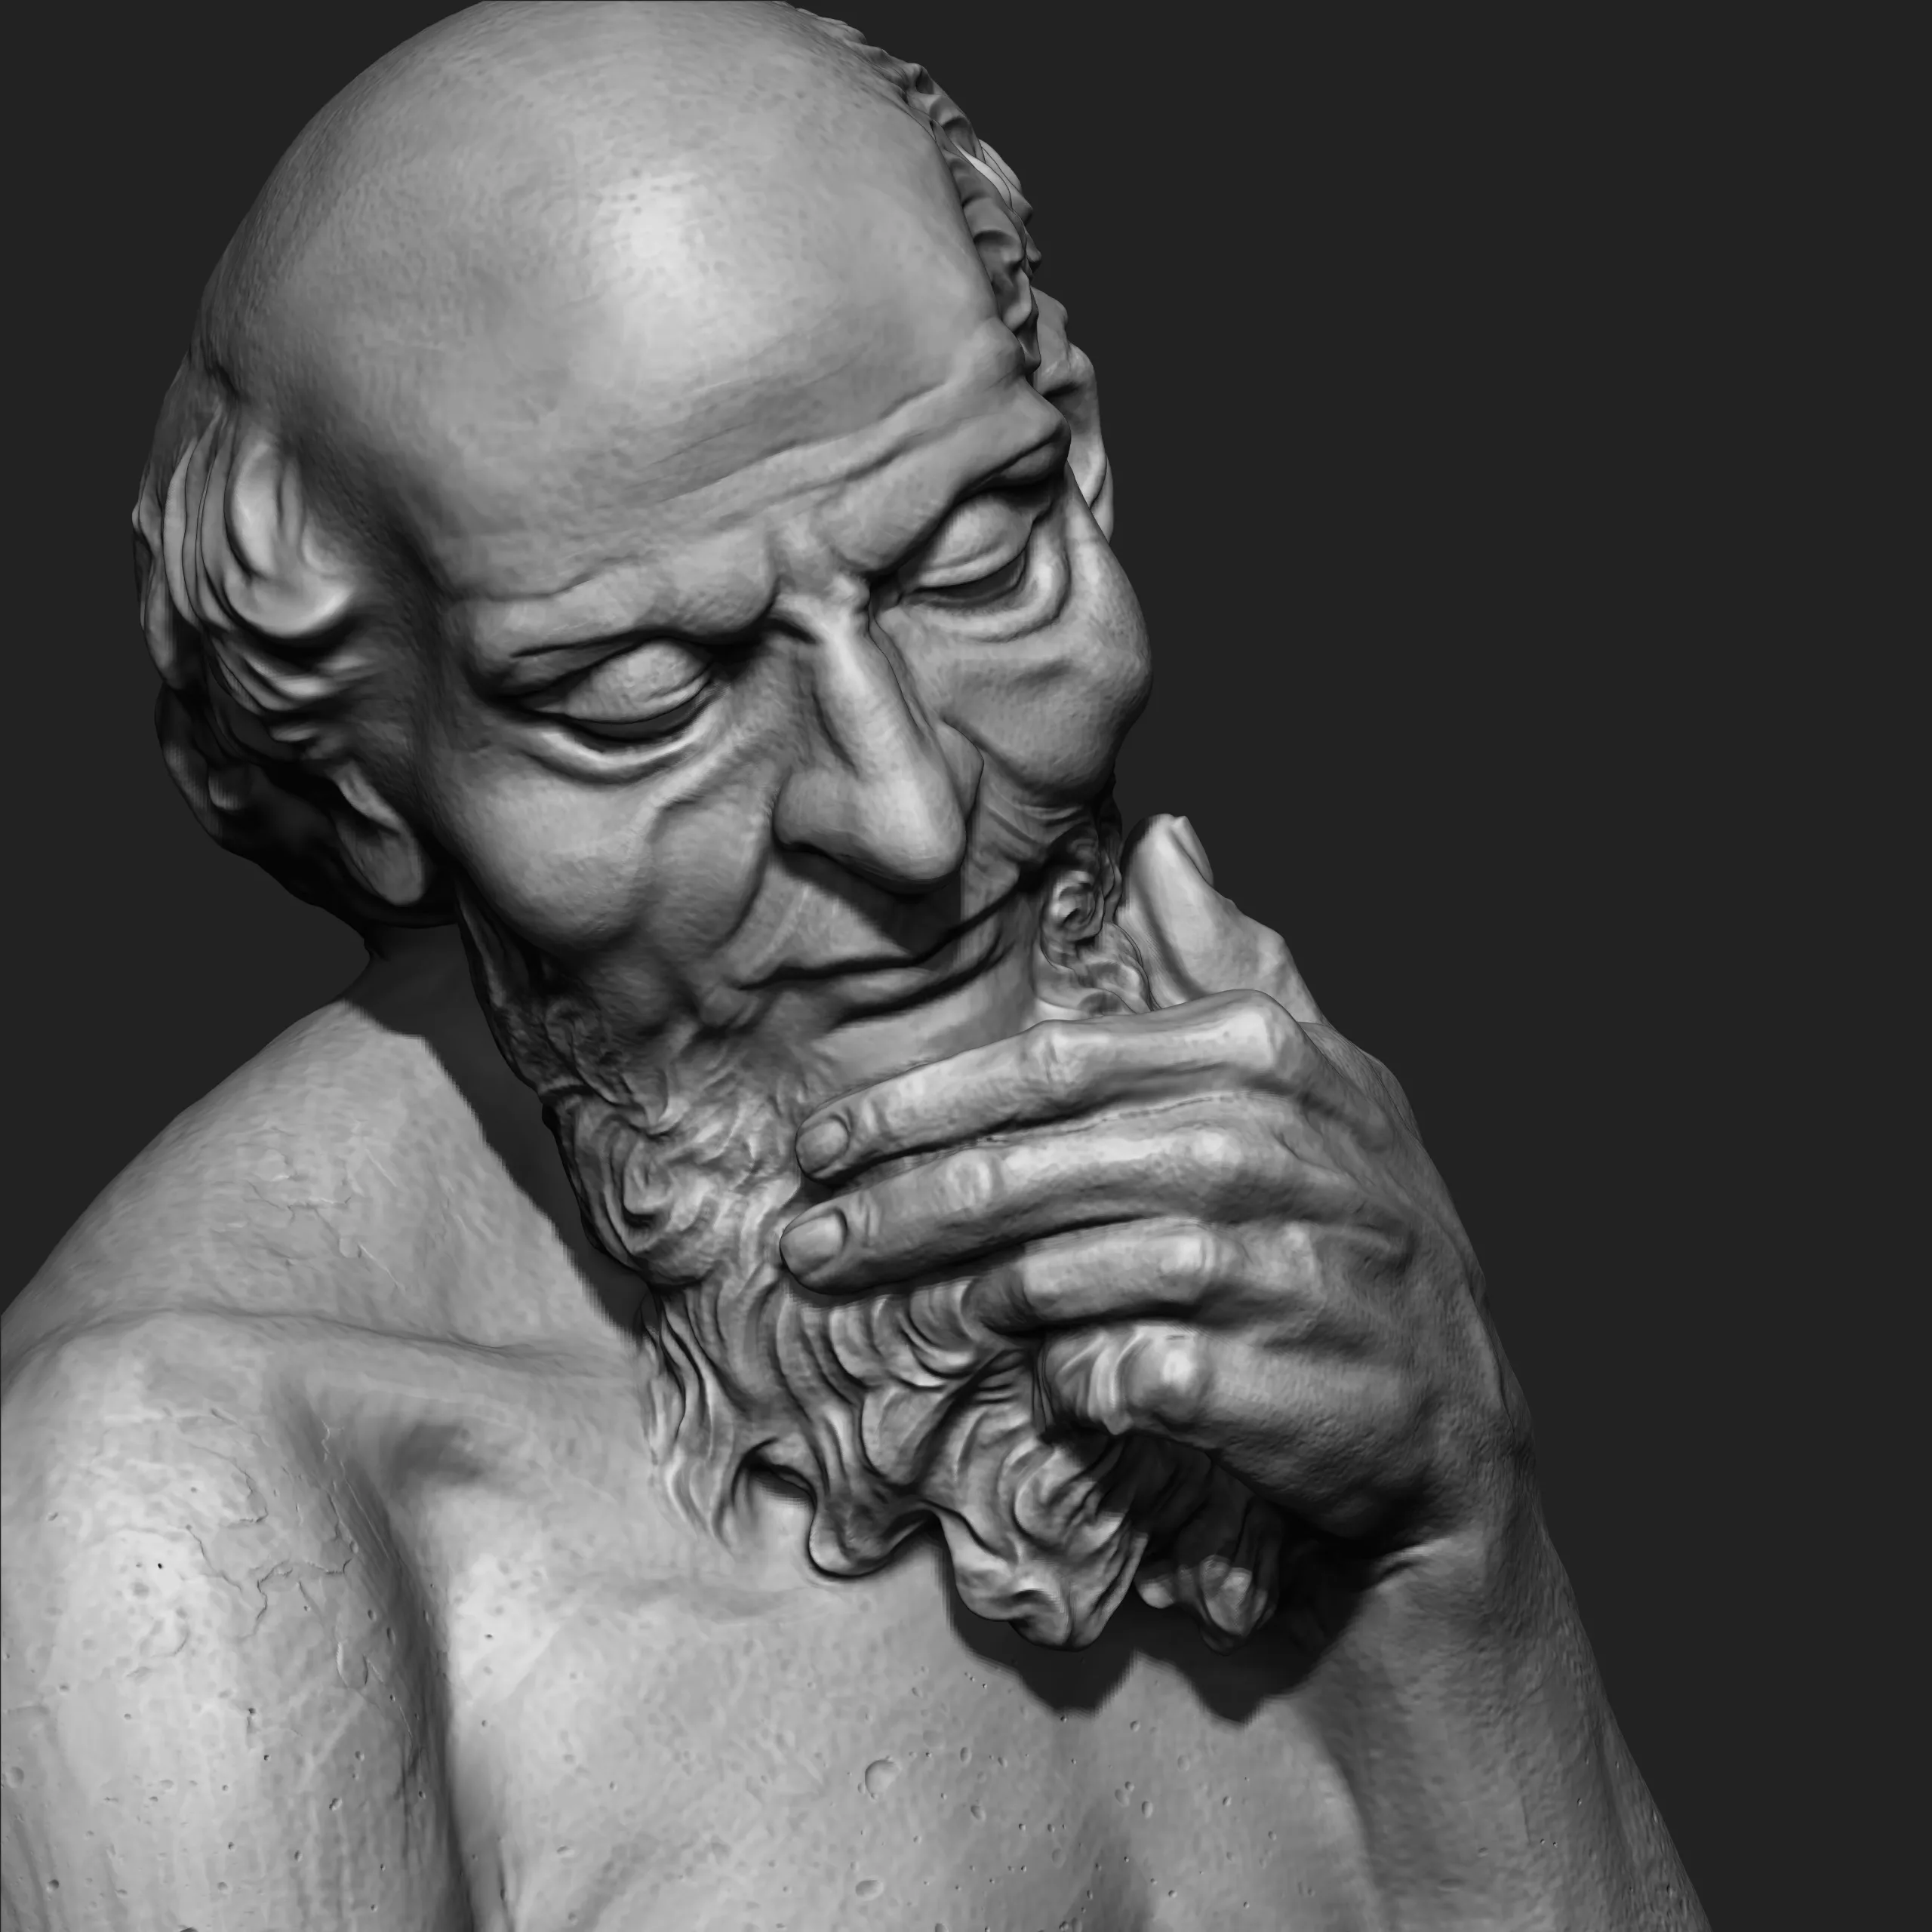 St.jerome Character Sculpture Zbrush 2019 HighPoly